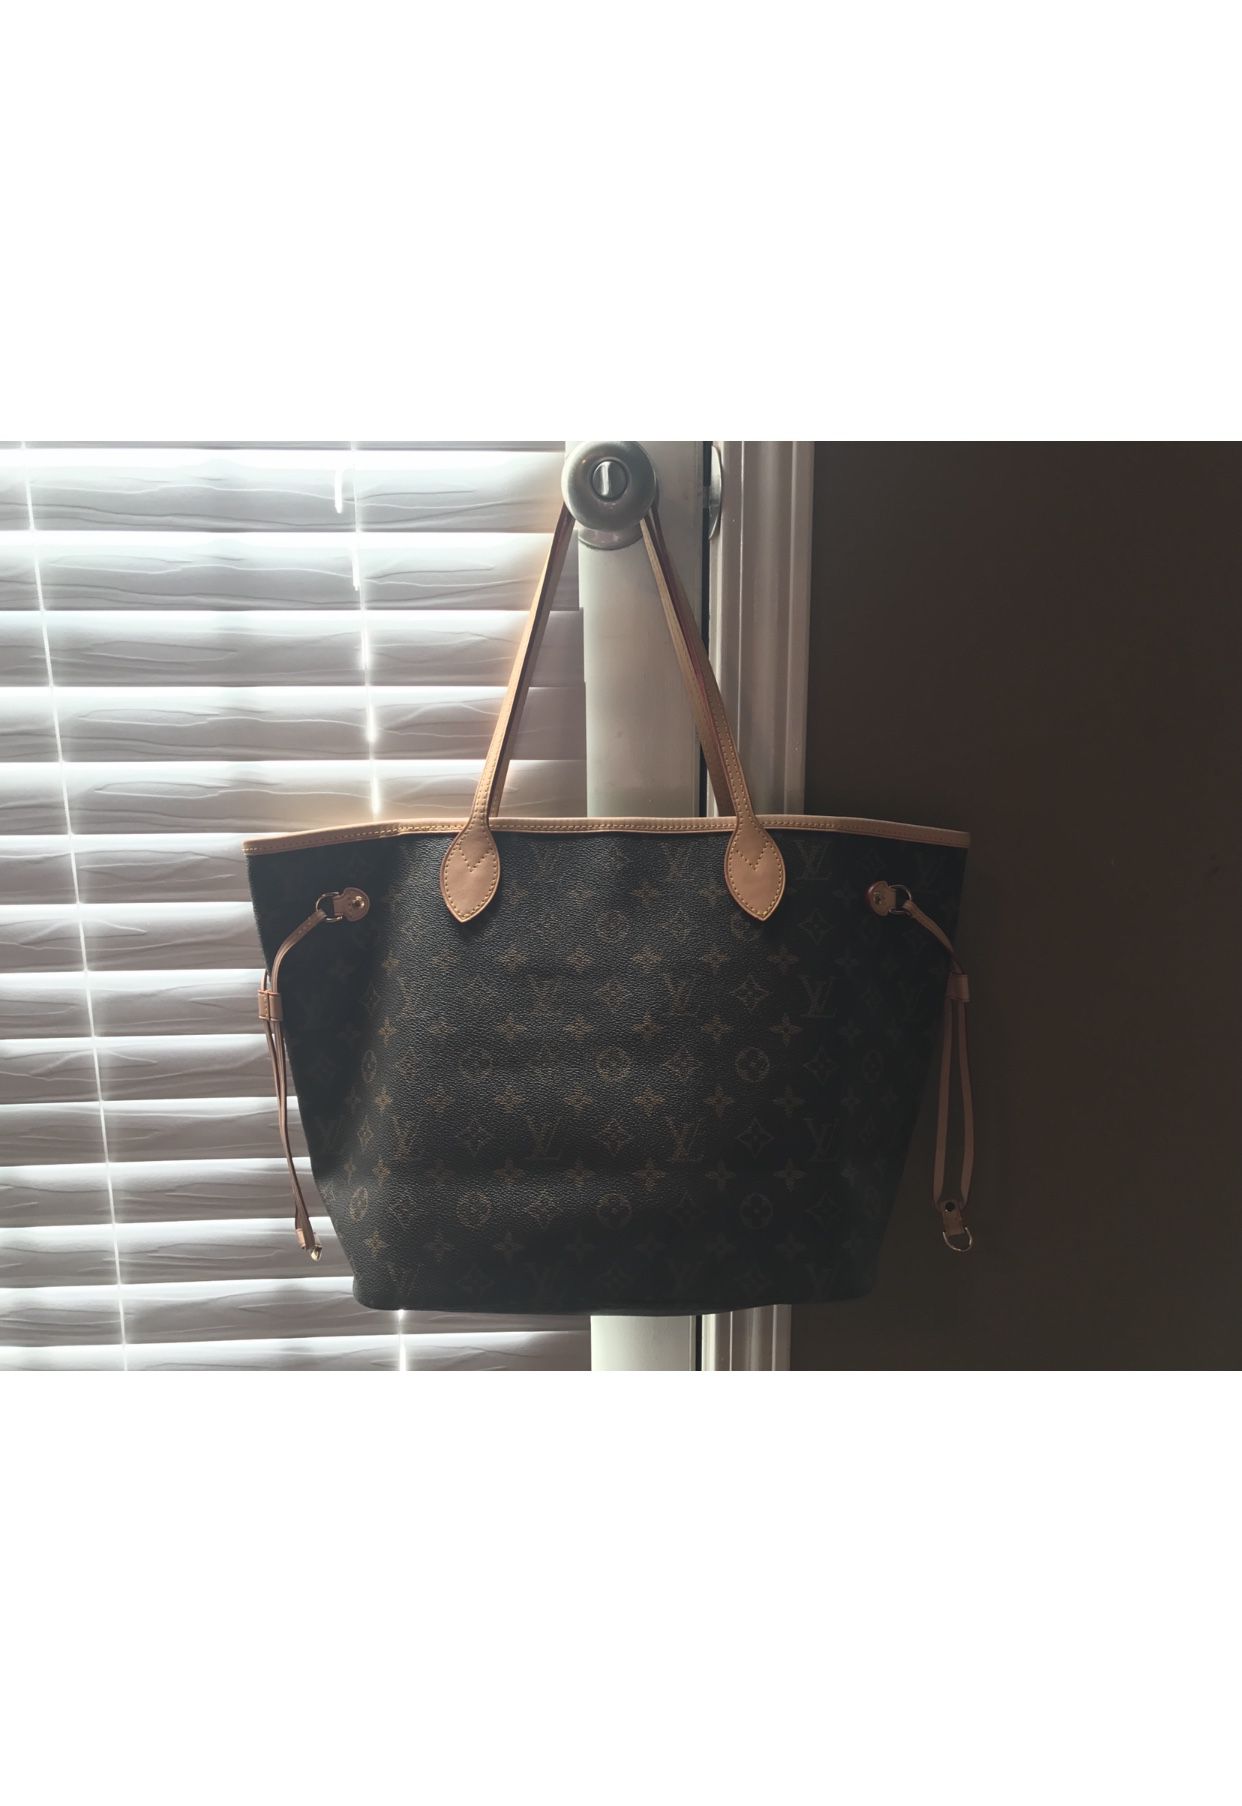 SOLD🎉 Authentic Louis Vuitton Neverfull MM